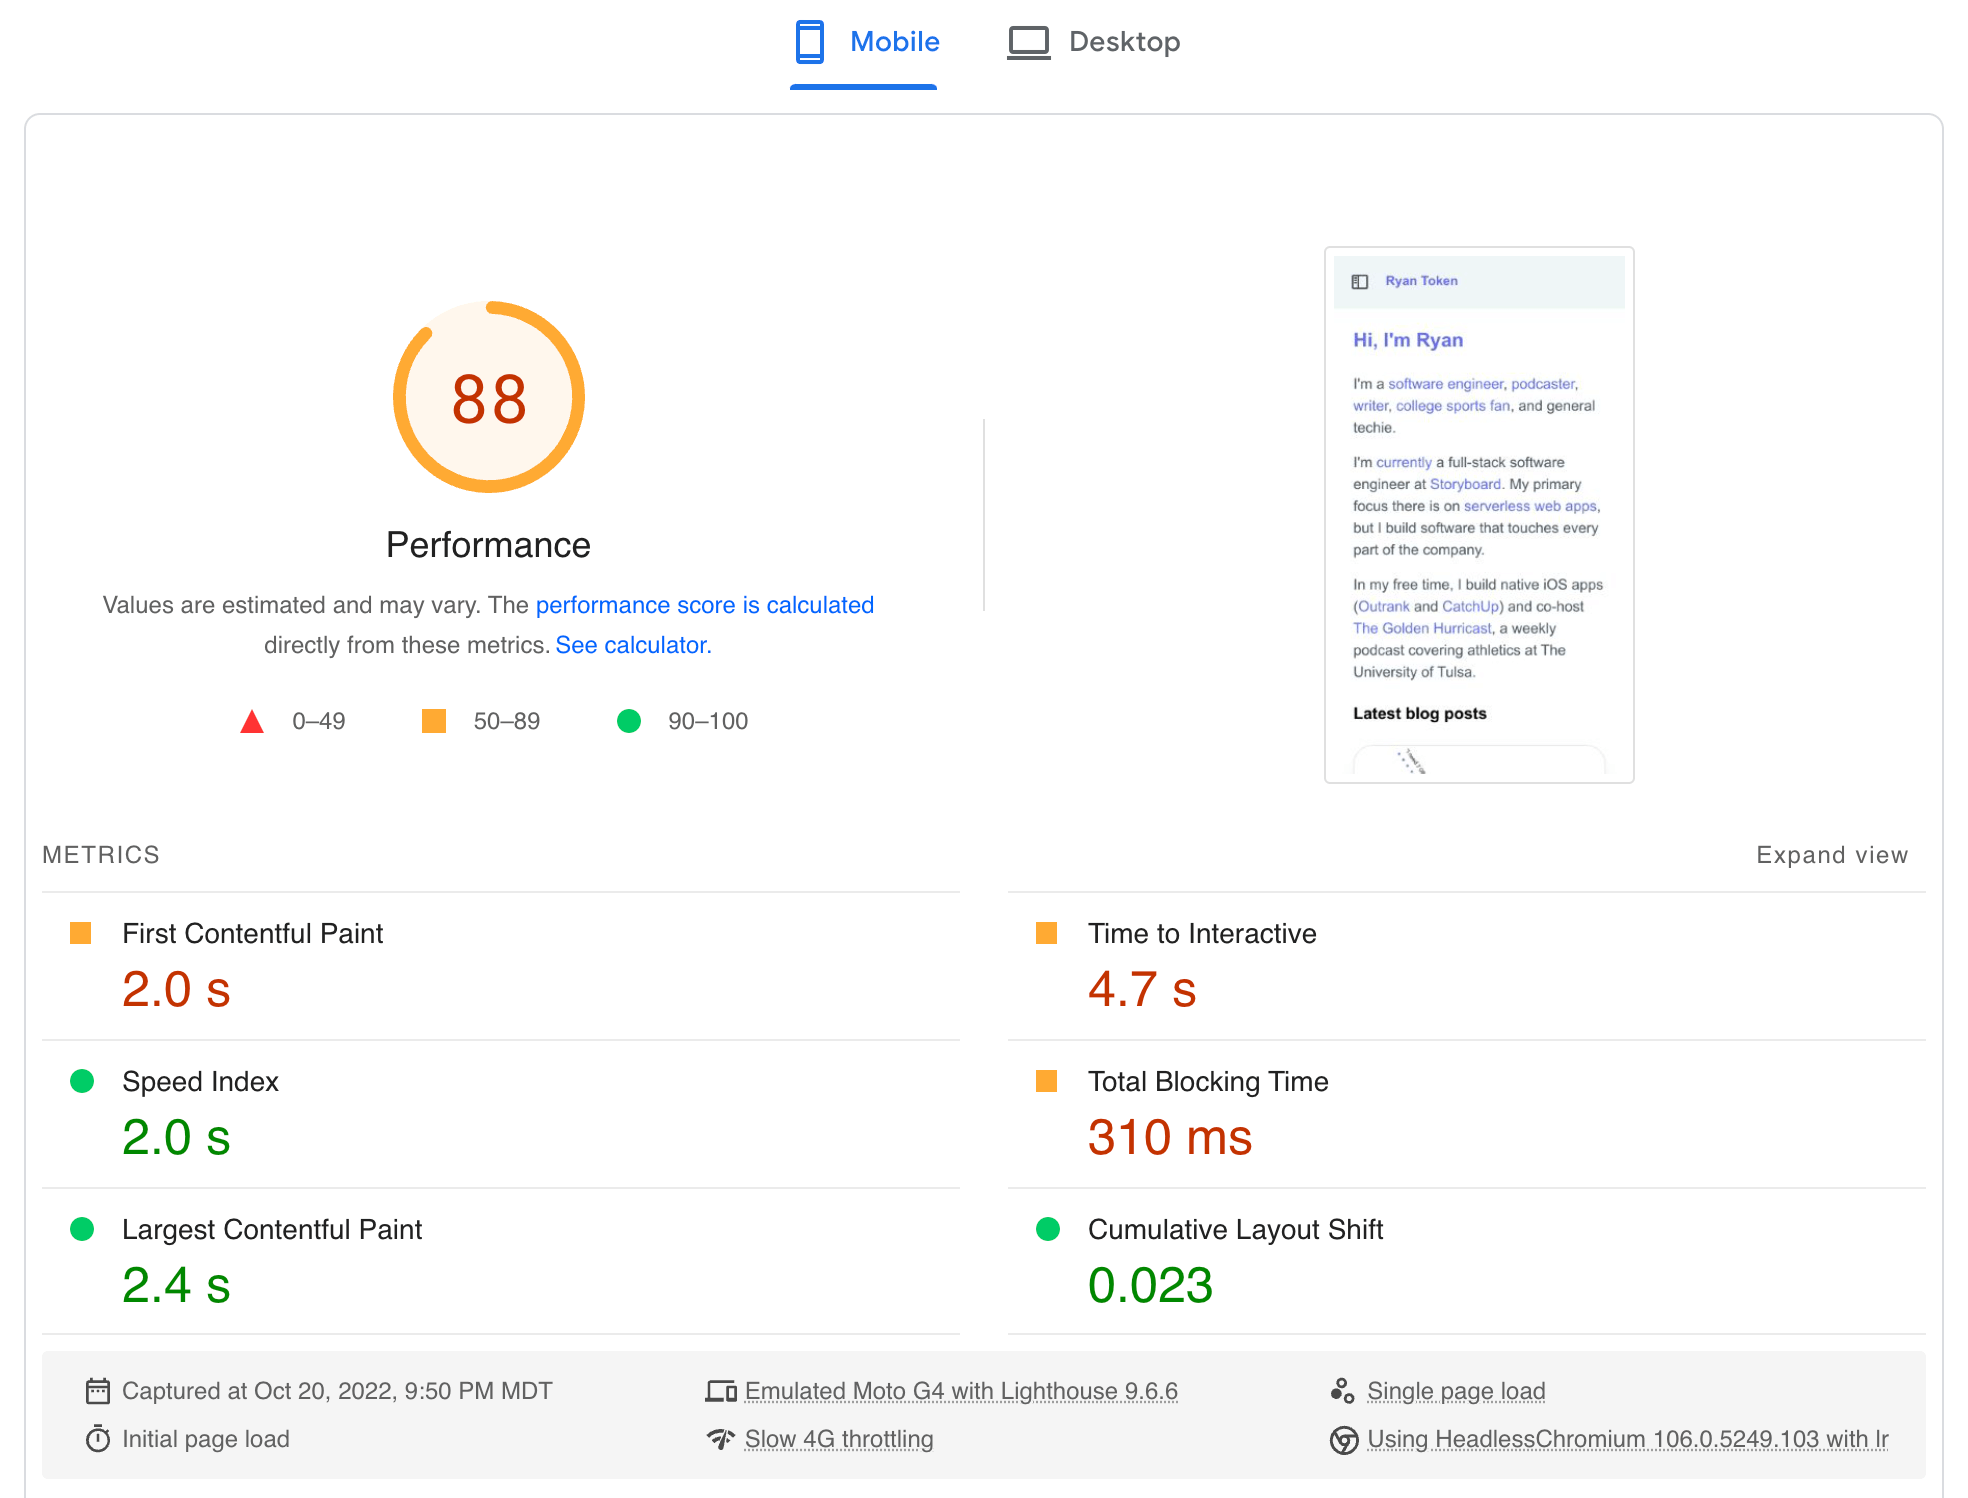 PageSpeed Insights scores for the Nuxt 3 site on mobile